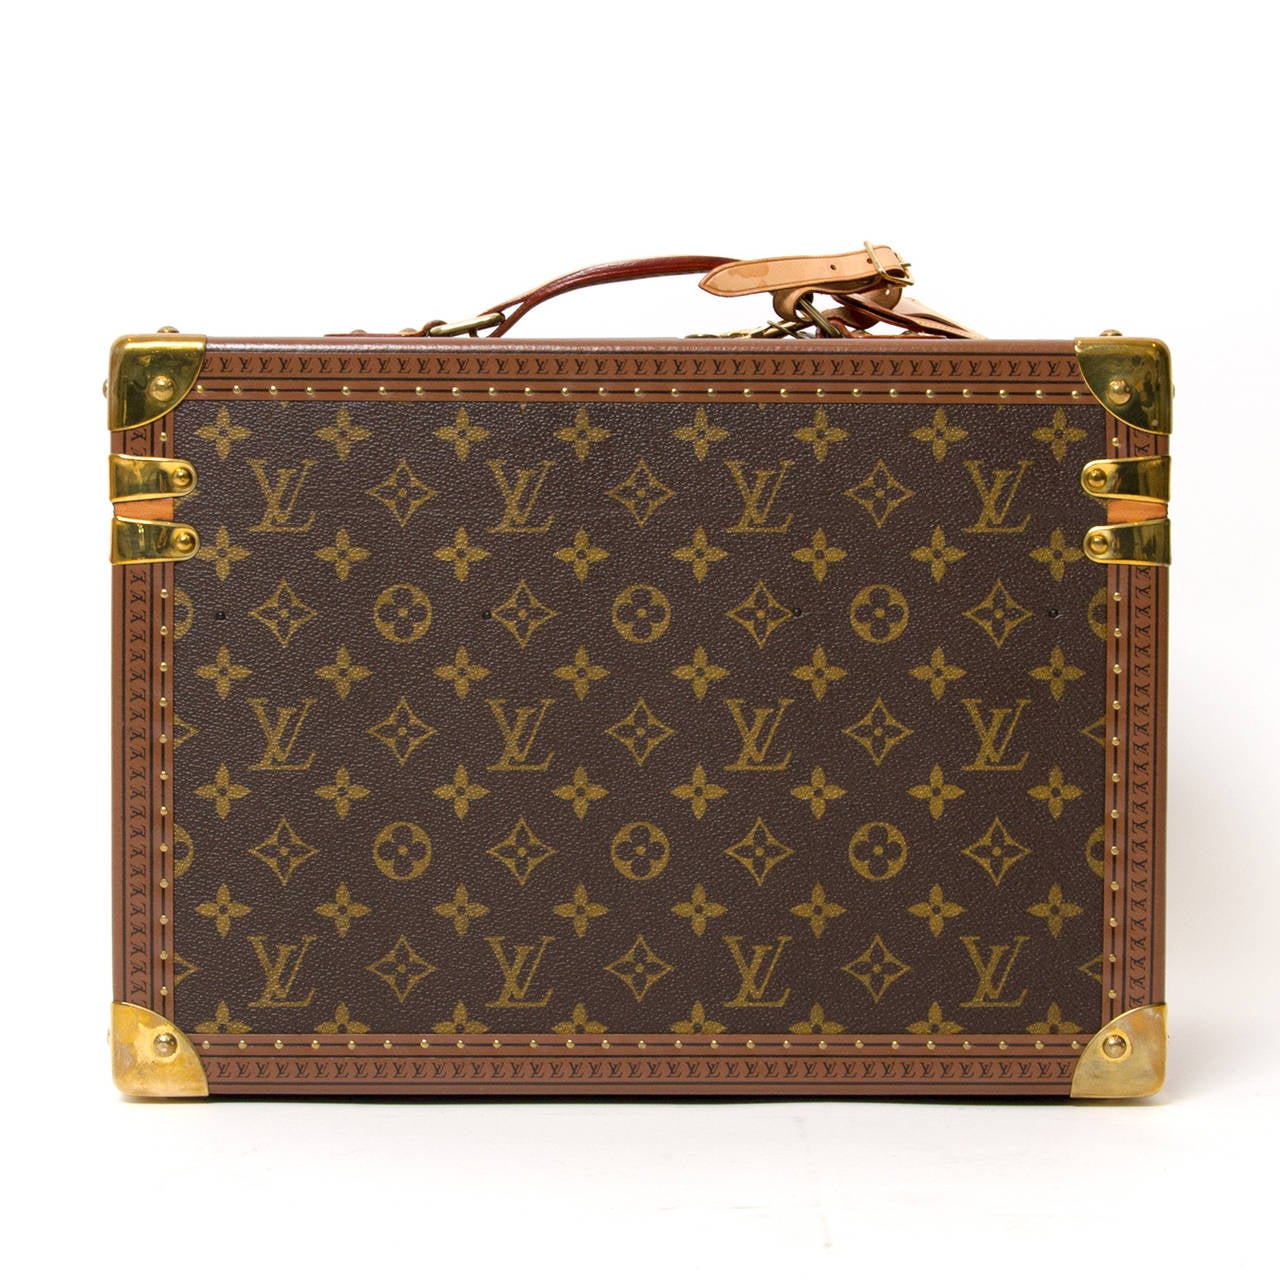 Designed for a variety of uses, this toiletries case in Monogram canvas can also hold jewellery and small products. Its washable interior lining makes it extremely practical.